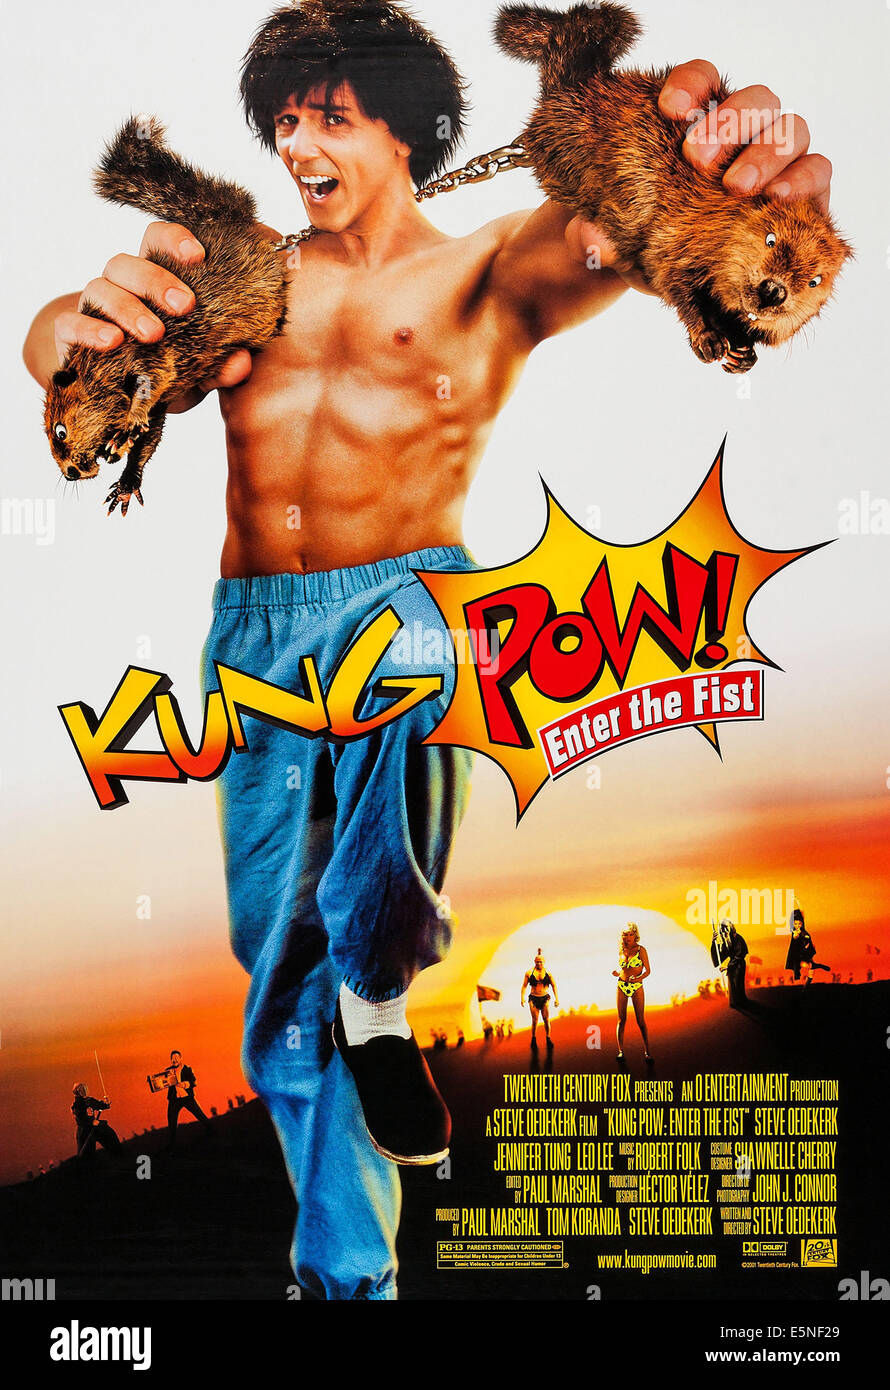 kung pow video download